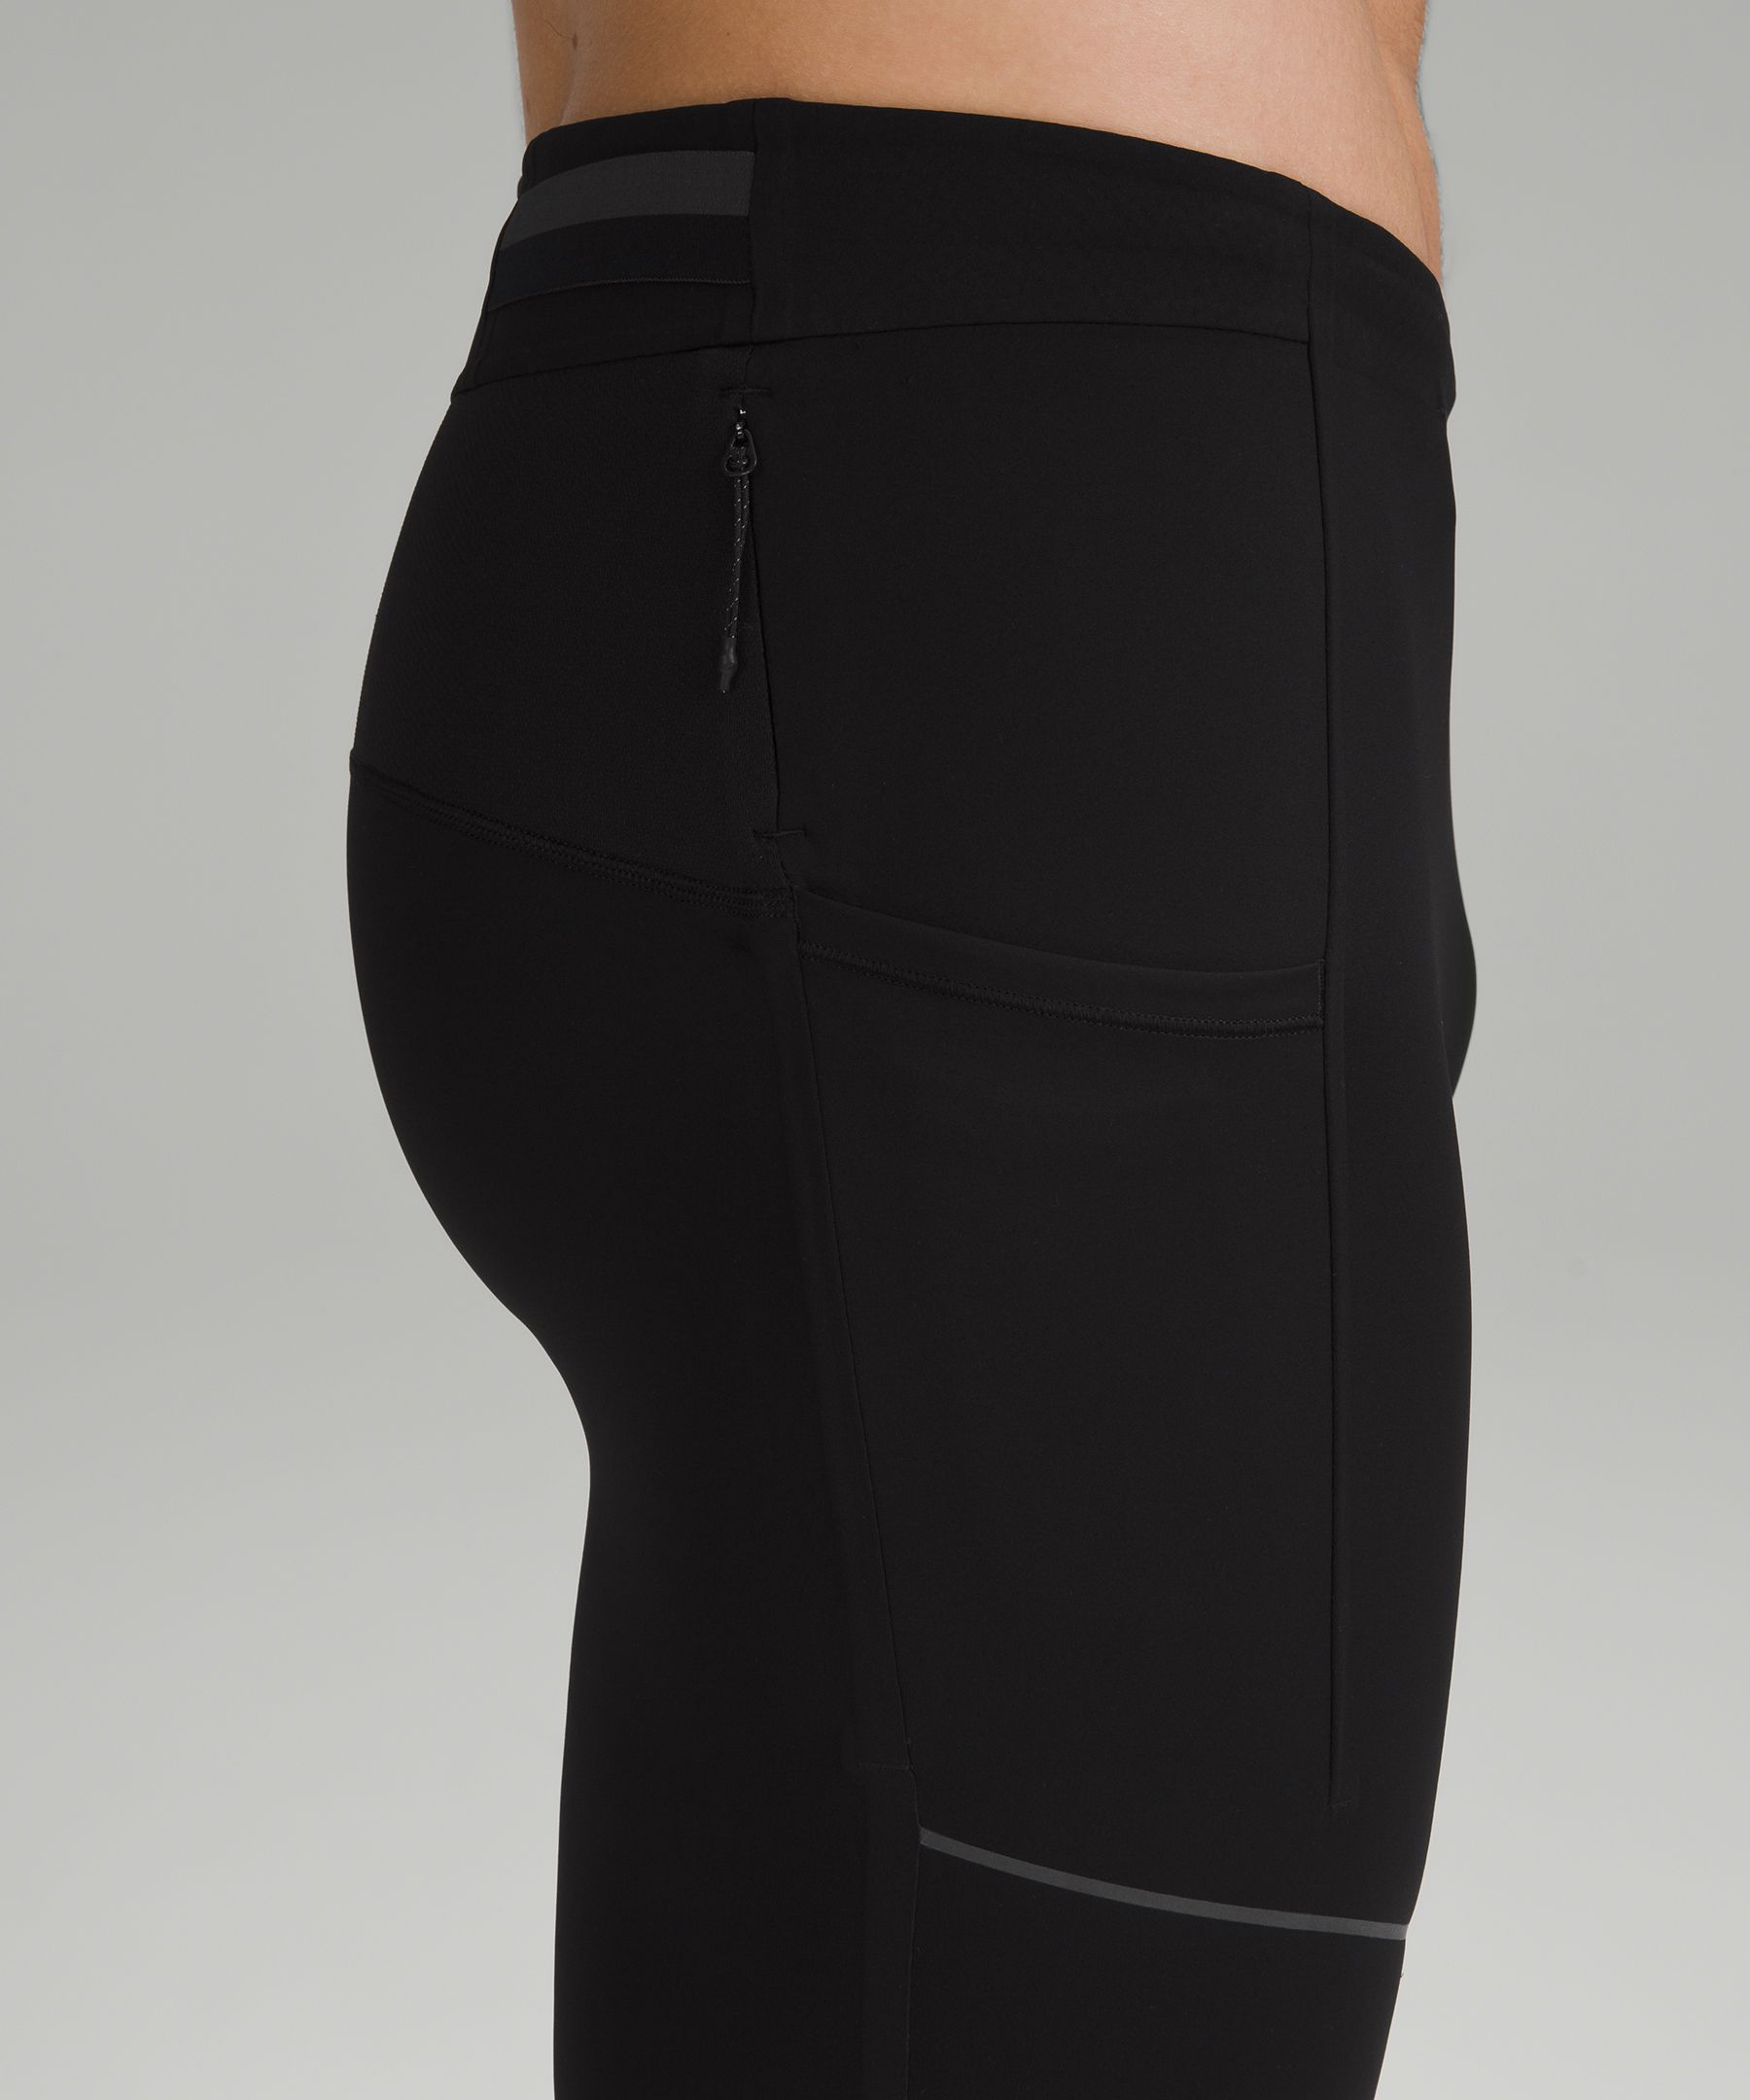 Lululemon fast and free tight 28 non reflective